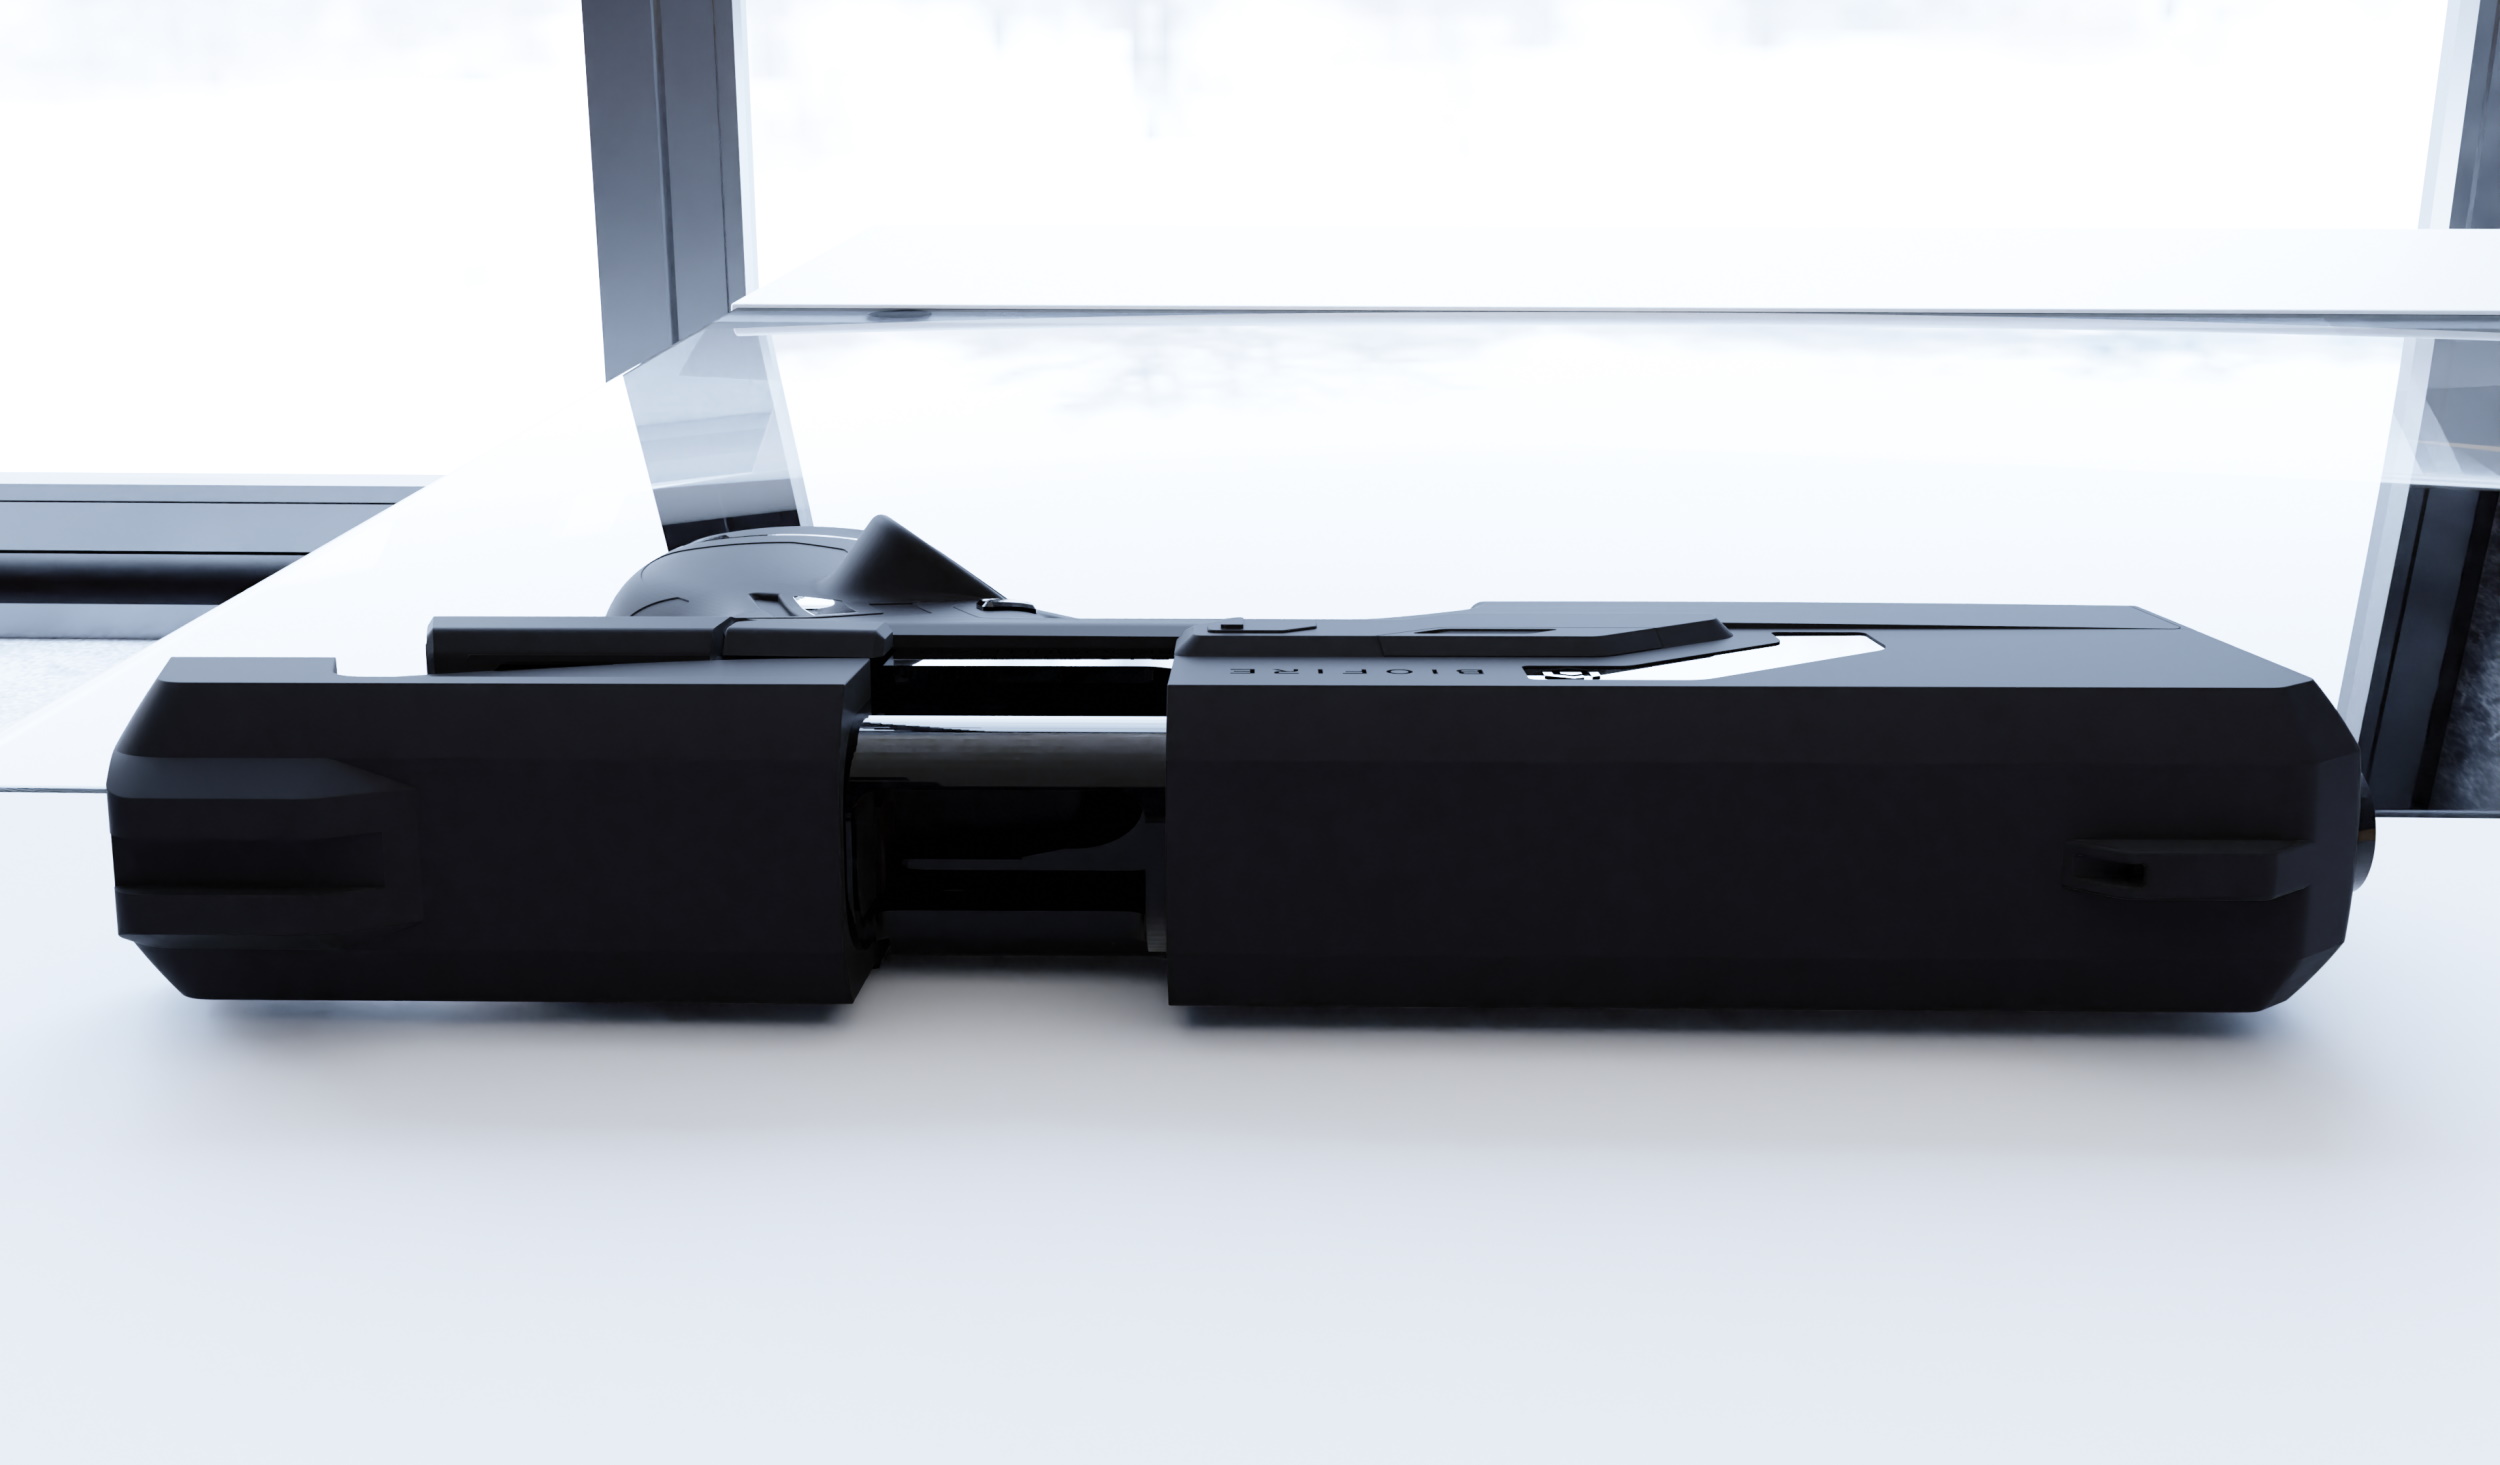 CG render of a Biofire gun resting on a table.